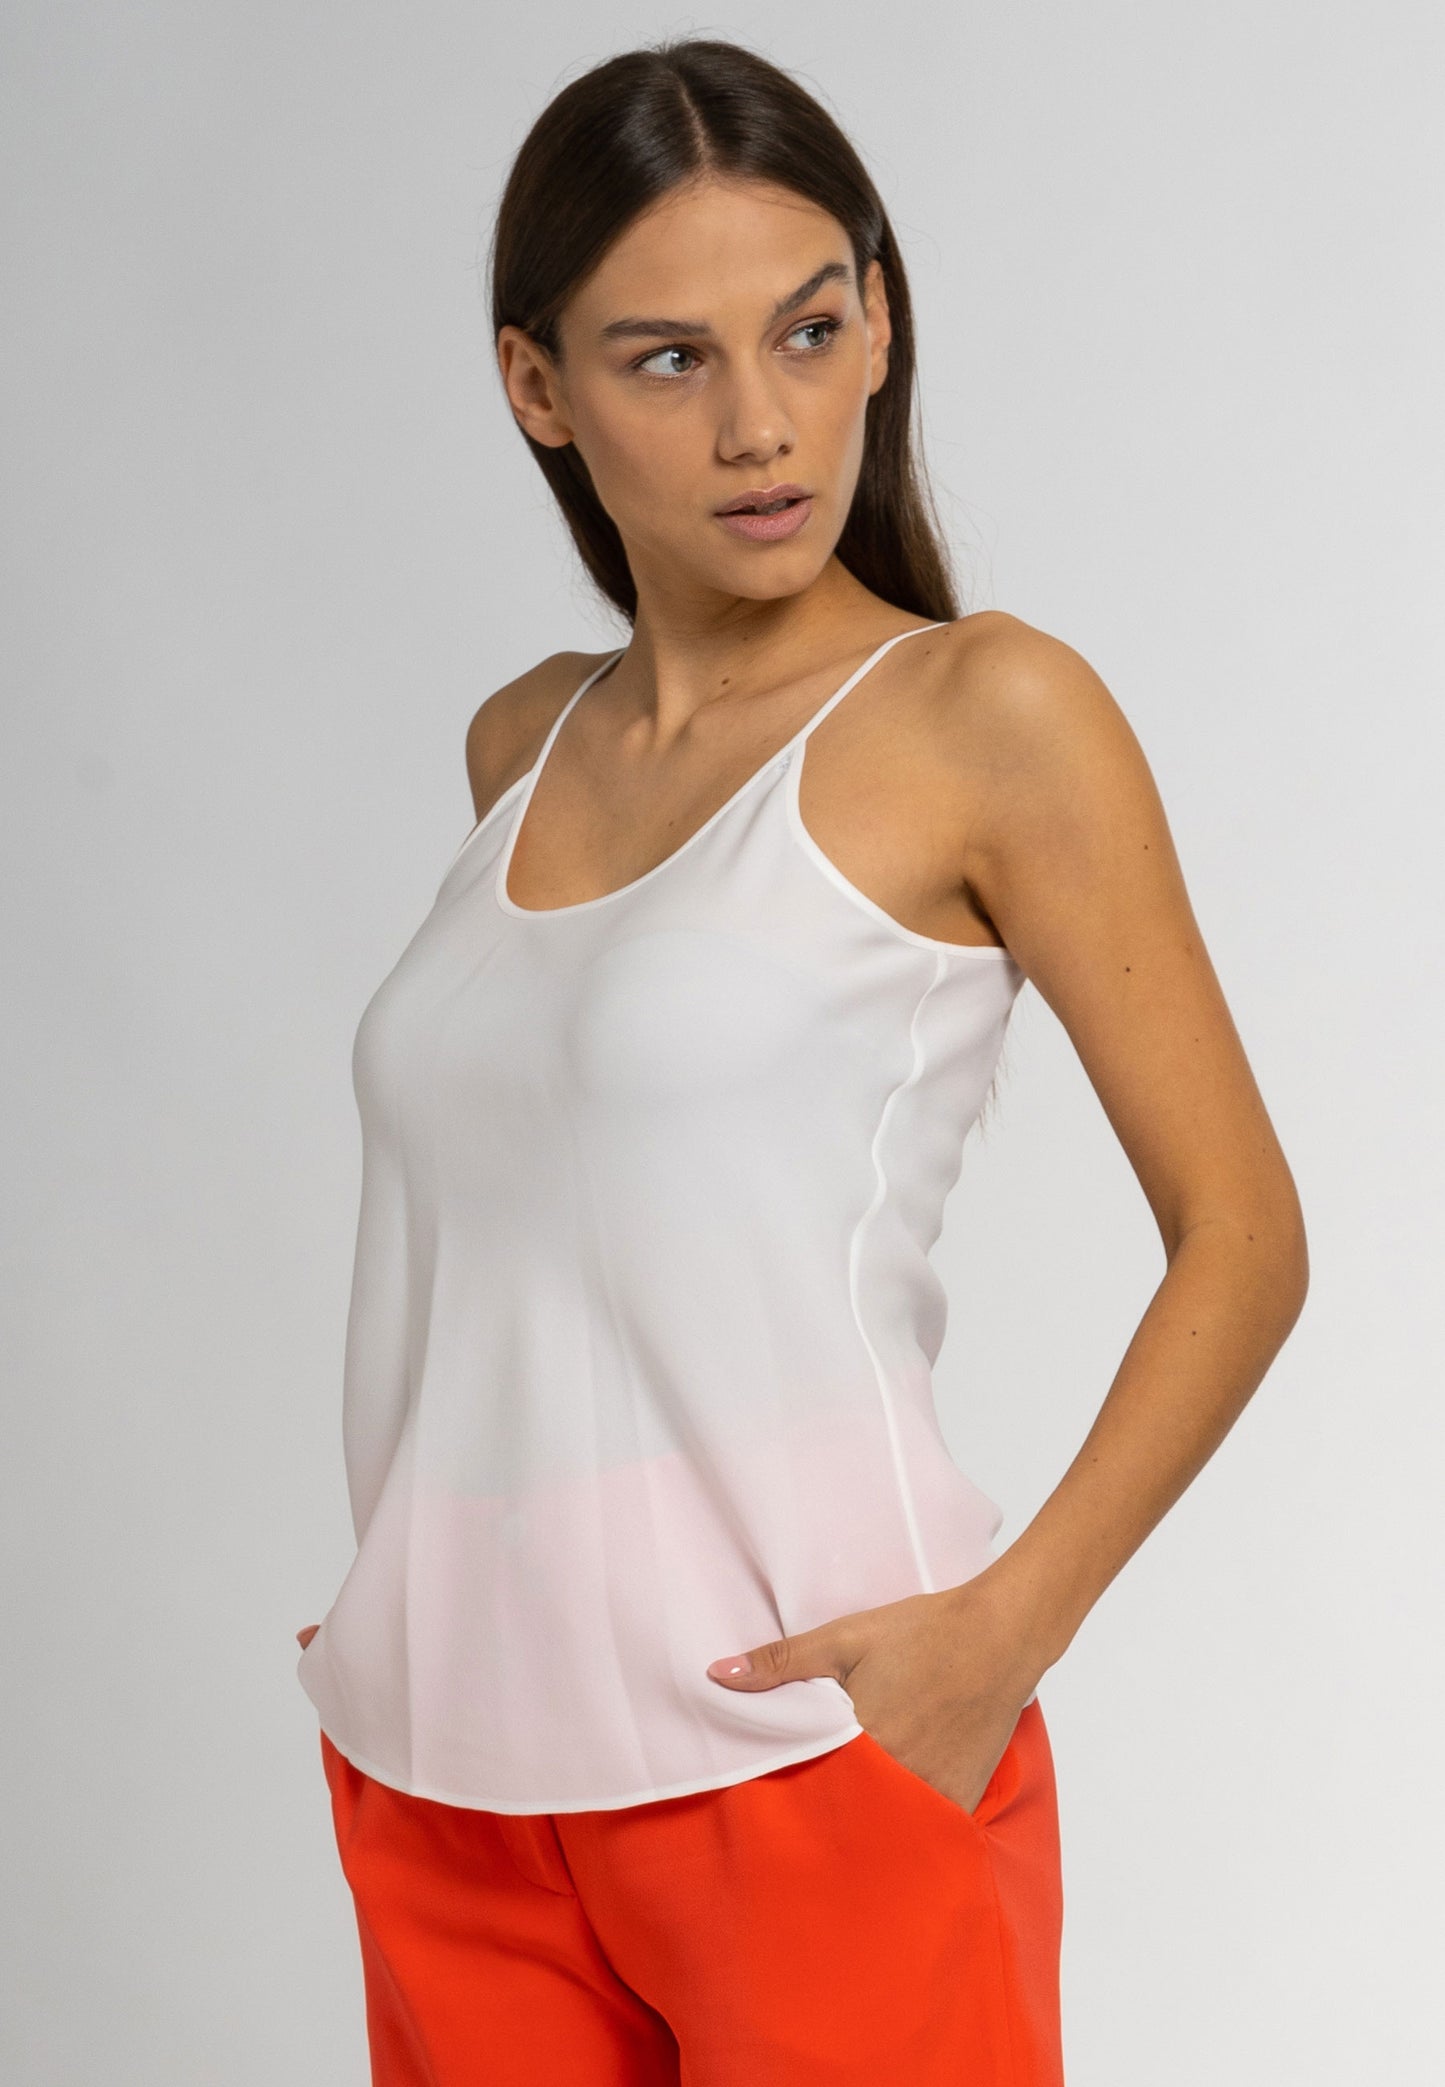 pure silk camisole, camisole in white, light weight fabric, sheer surface quality, chic silk camisole, silk camisole top, silk camisole blouse, silk cami top, camisoles for women, blouse for women, fine knitwear ideas; silk top Silk Camisole; sleeveless top; white silk top